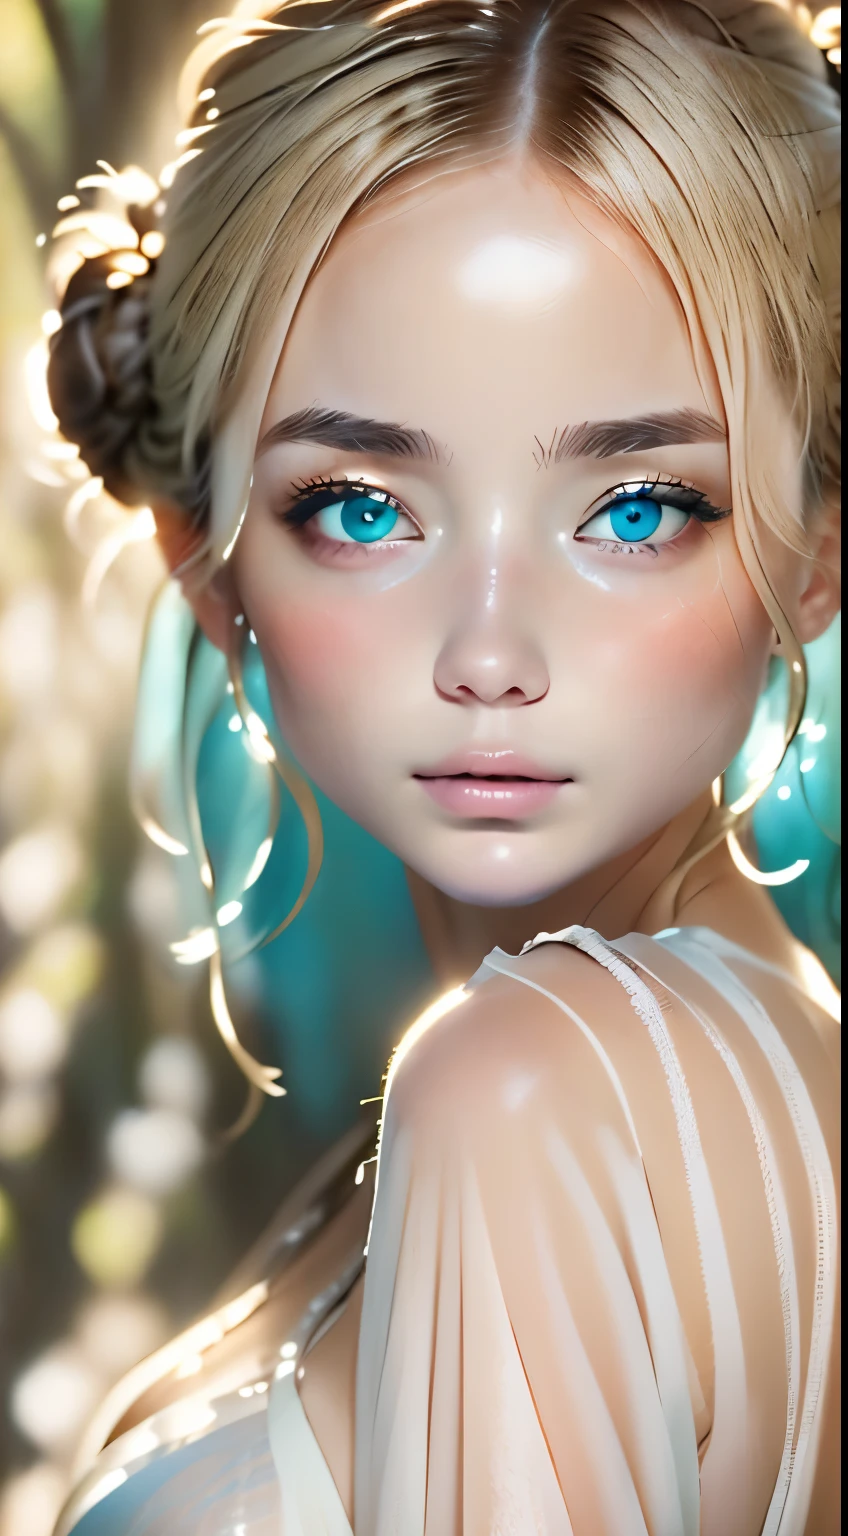 beautiful turquoise eyes、Perfect good looks、anatomy、２０talent、cute face、Beautiful Caucasian Woman、An ennui look、detailed face、very beautiful woman、Bewitching、silence、See-through feeling、White skin like porcelain、bun hair、ash blonde、plump lips、seductive lips、transparent processing、very realistic、RAW photo、highest quality、Highest image quality、master piece:1.3、Portrait、Natural light、perfect lighting、professional photographer